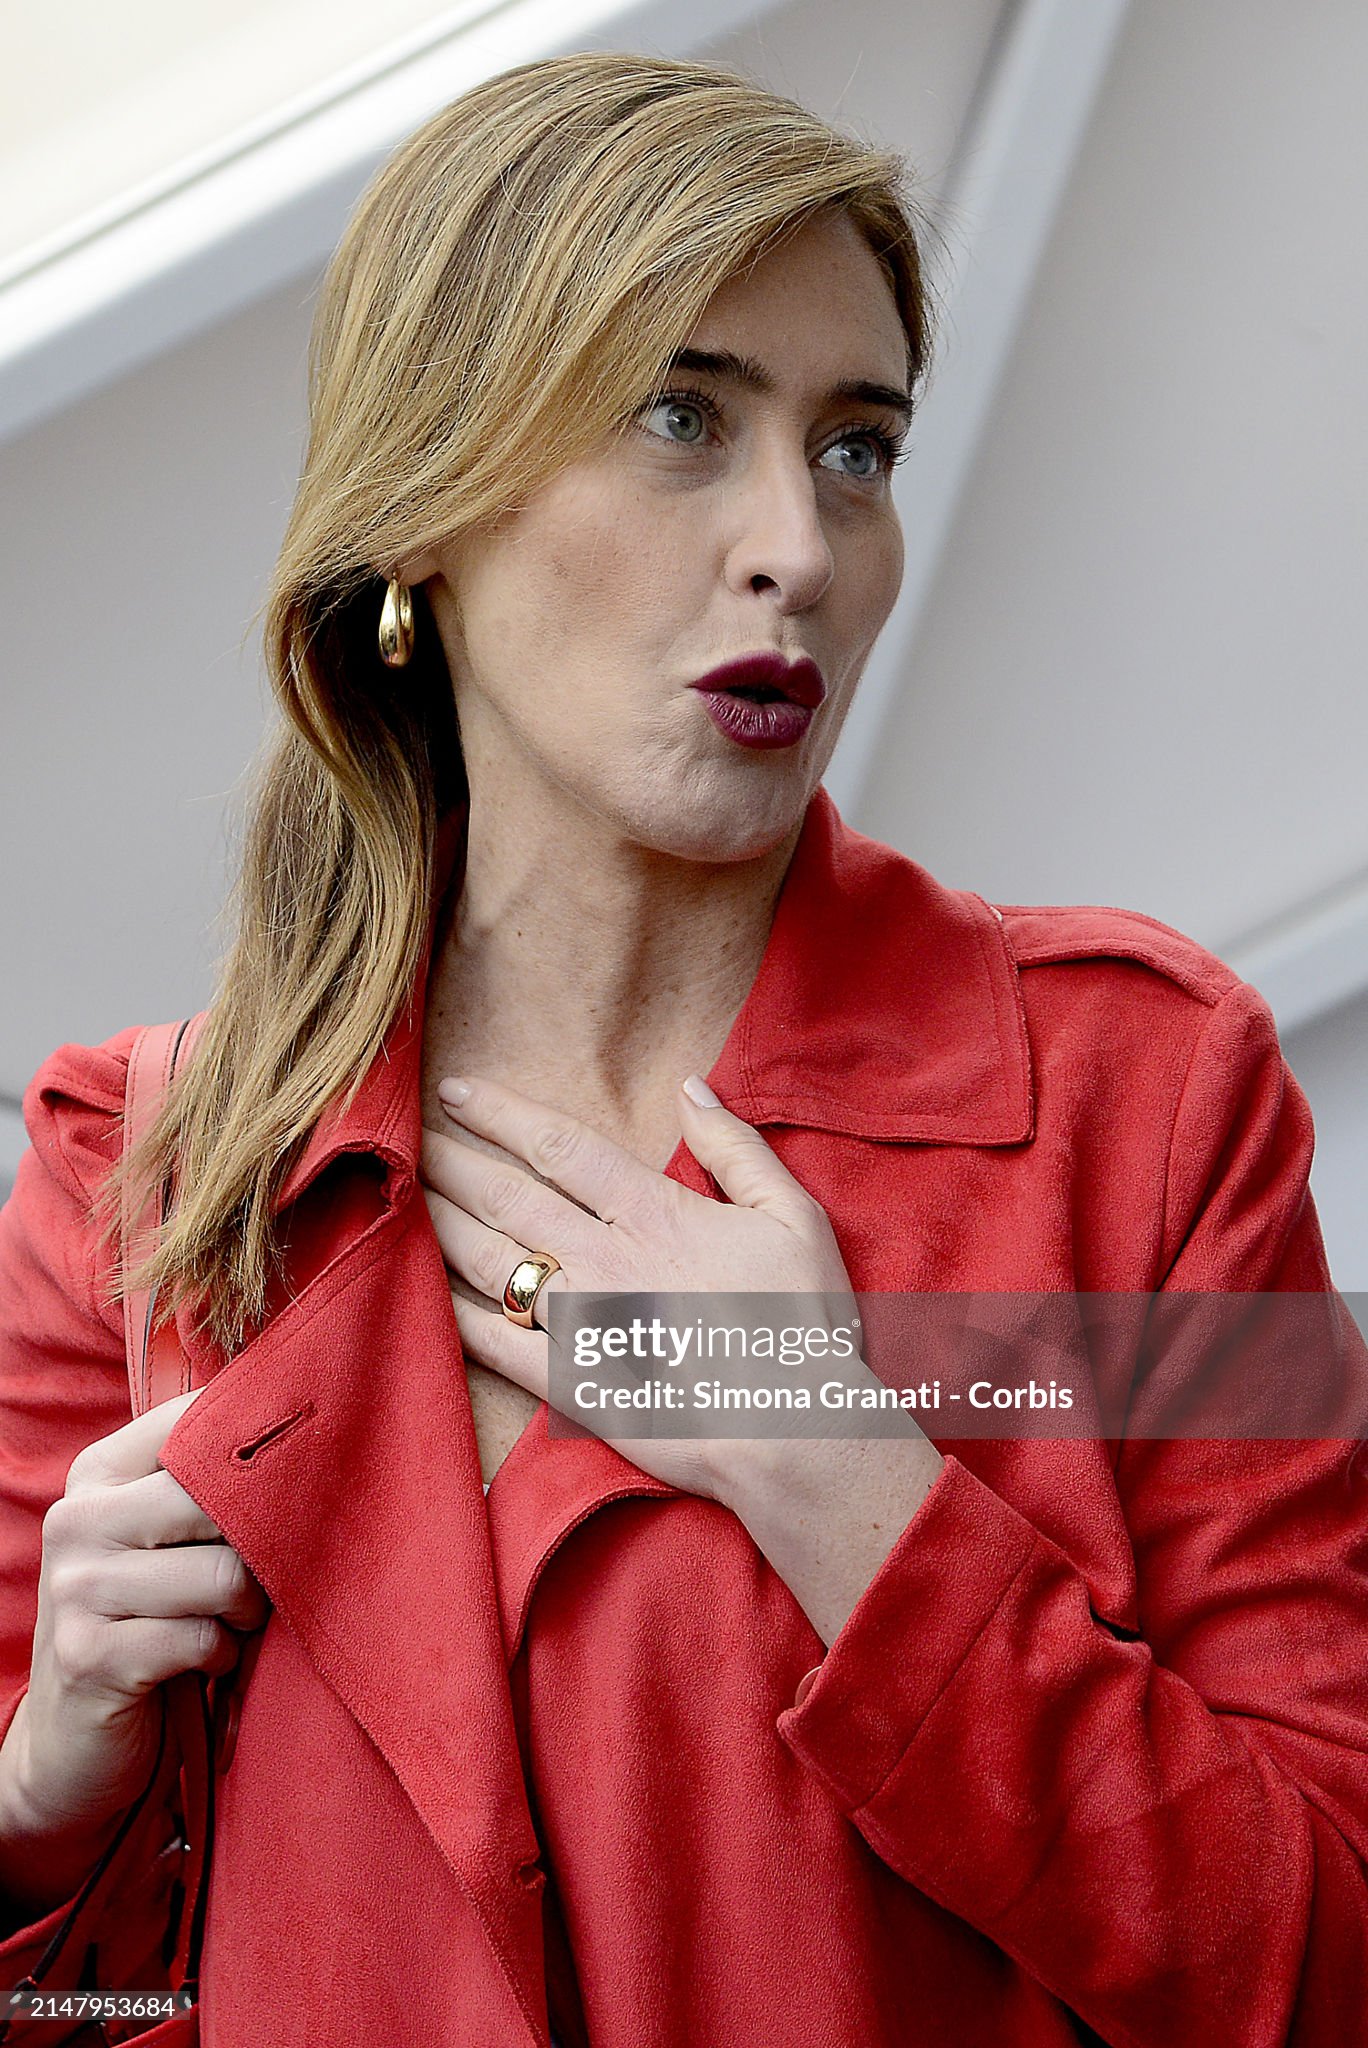 rome-italy-maria-elena-boschi-during-the-presentation-of-the-symbol-and-the-list-for-the.jpg